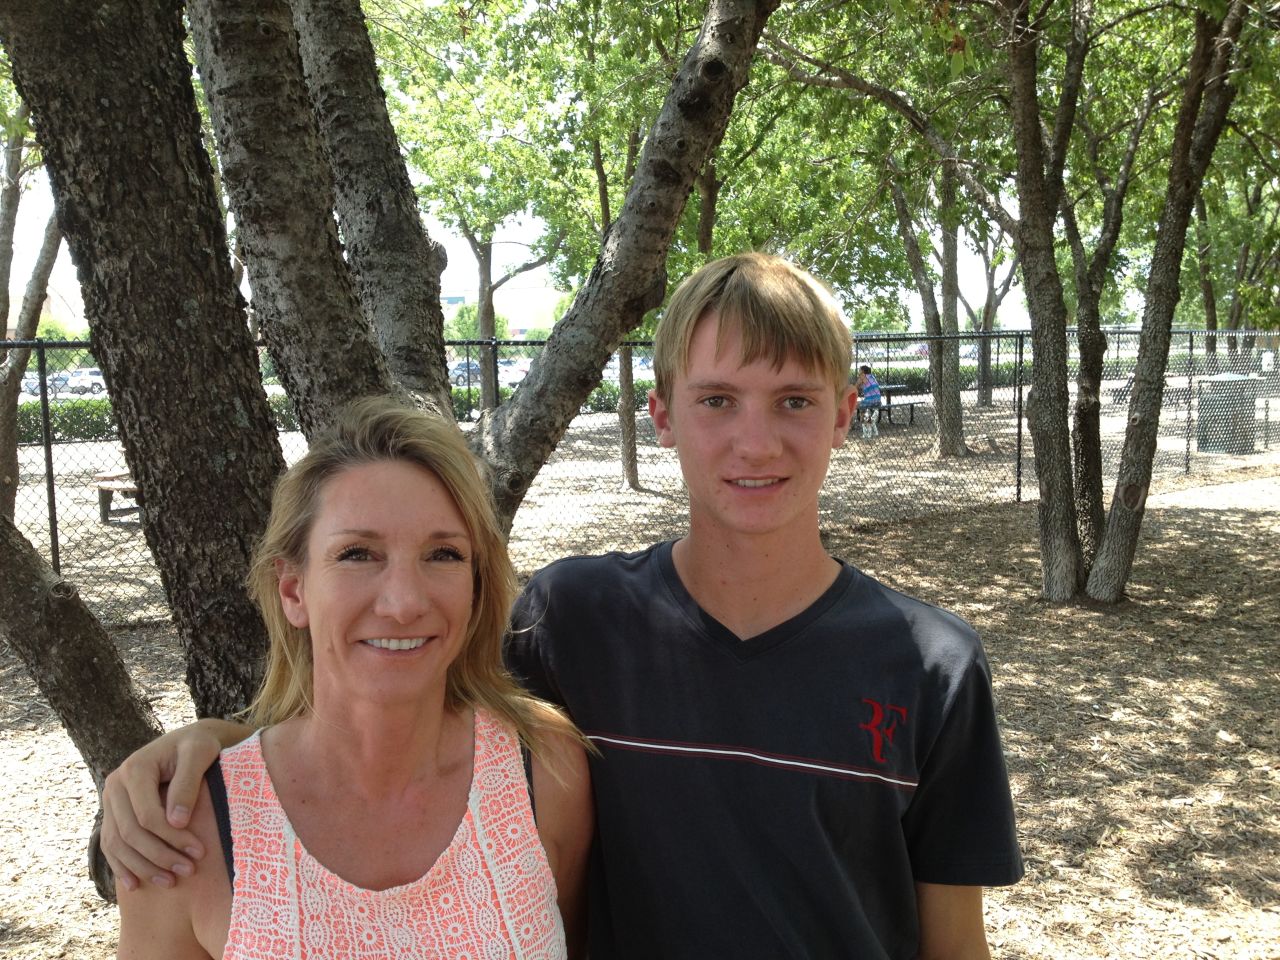 Writer Deborah Mitchell's oldest son, Nick, will be a college freshman this fall. She shared "unofficial commandments" for him to remember on CNN iReport. "I have written both my kids letters over the years, and they've kept them," Mitchell said. "Our memories change as we grow older, so these letters are just a snapshot of what I was thinking and experiencing at the time and the things I wanted them to know."